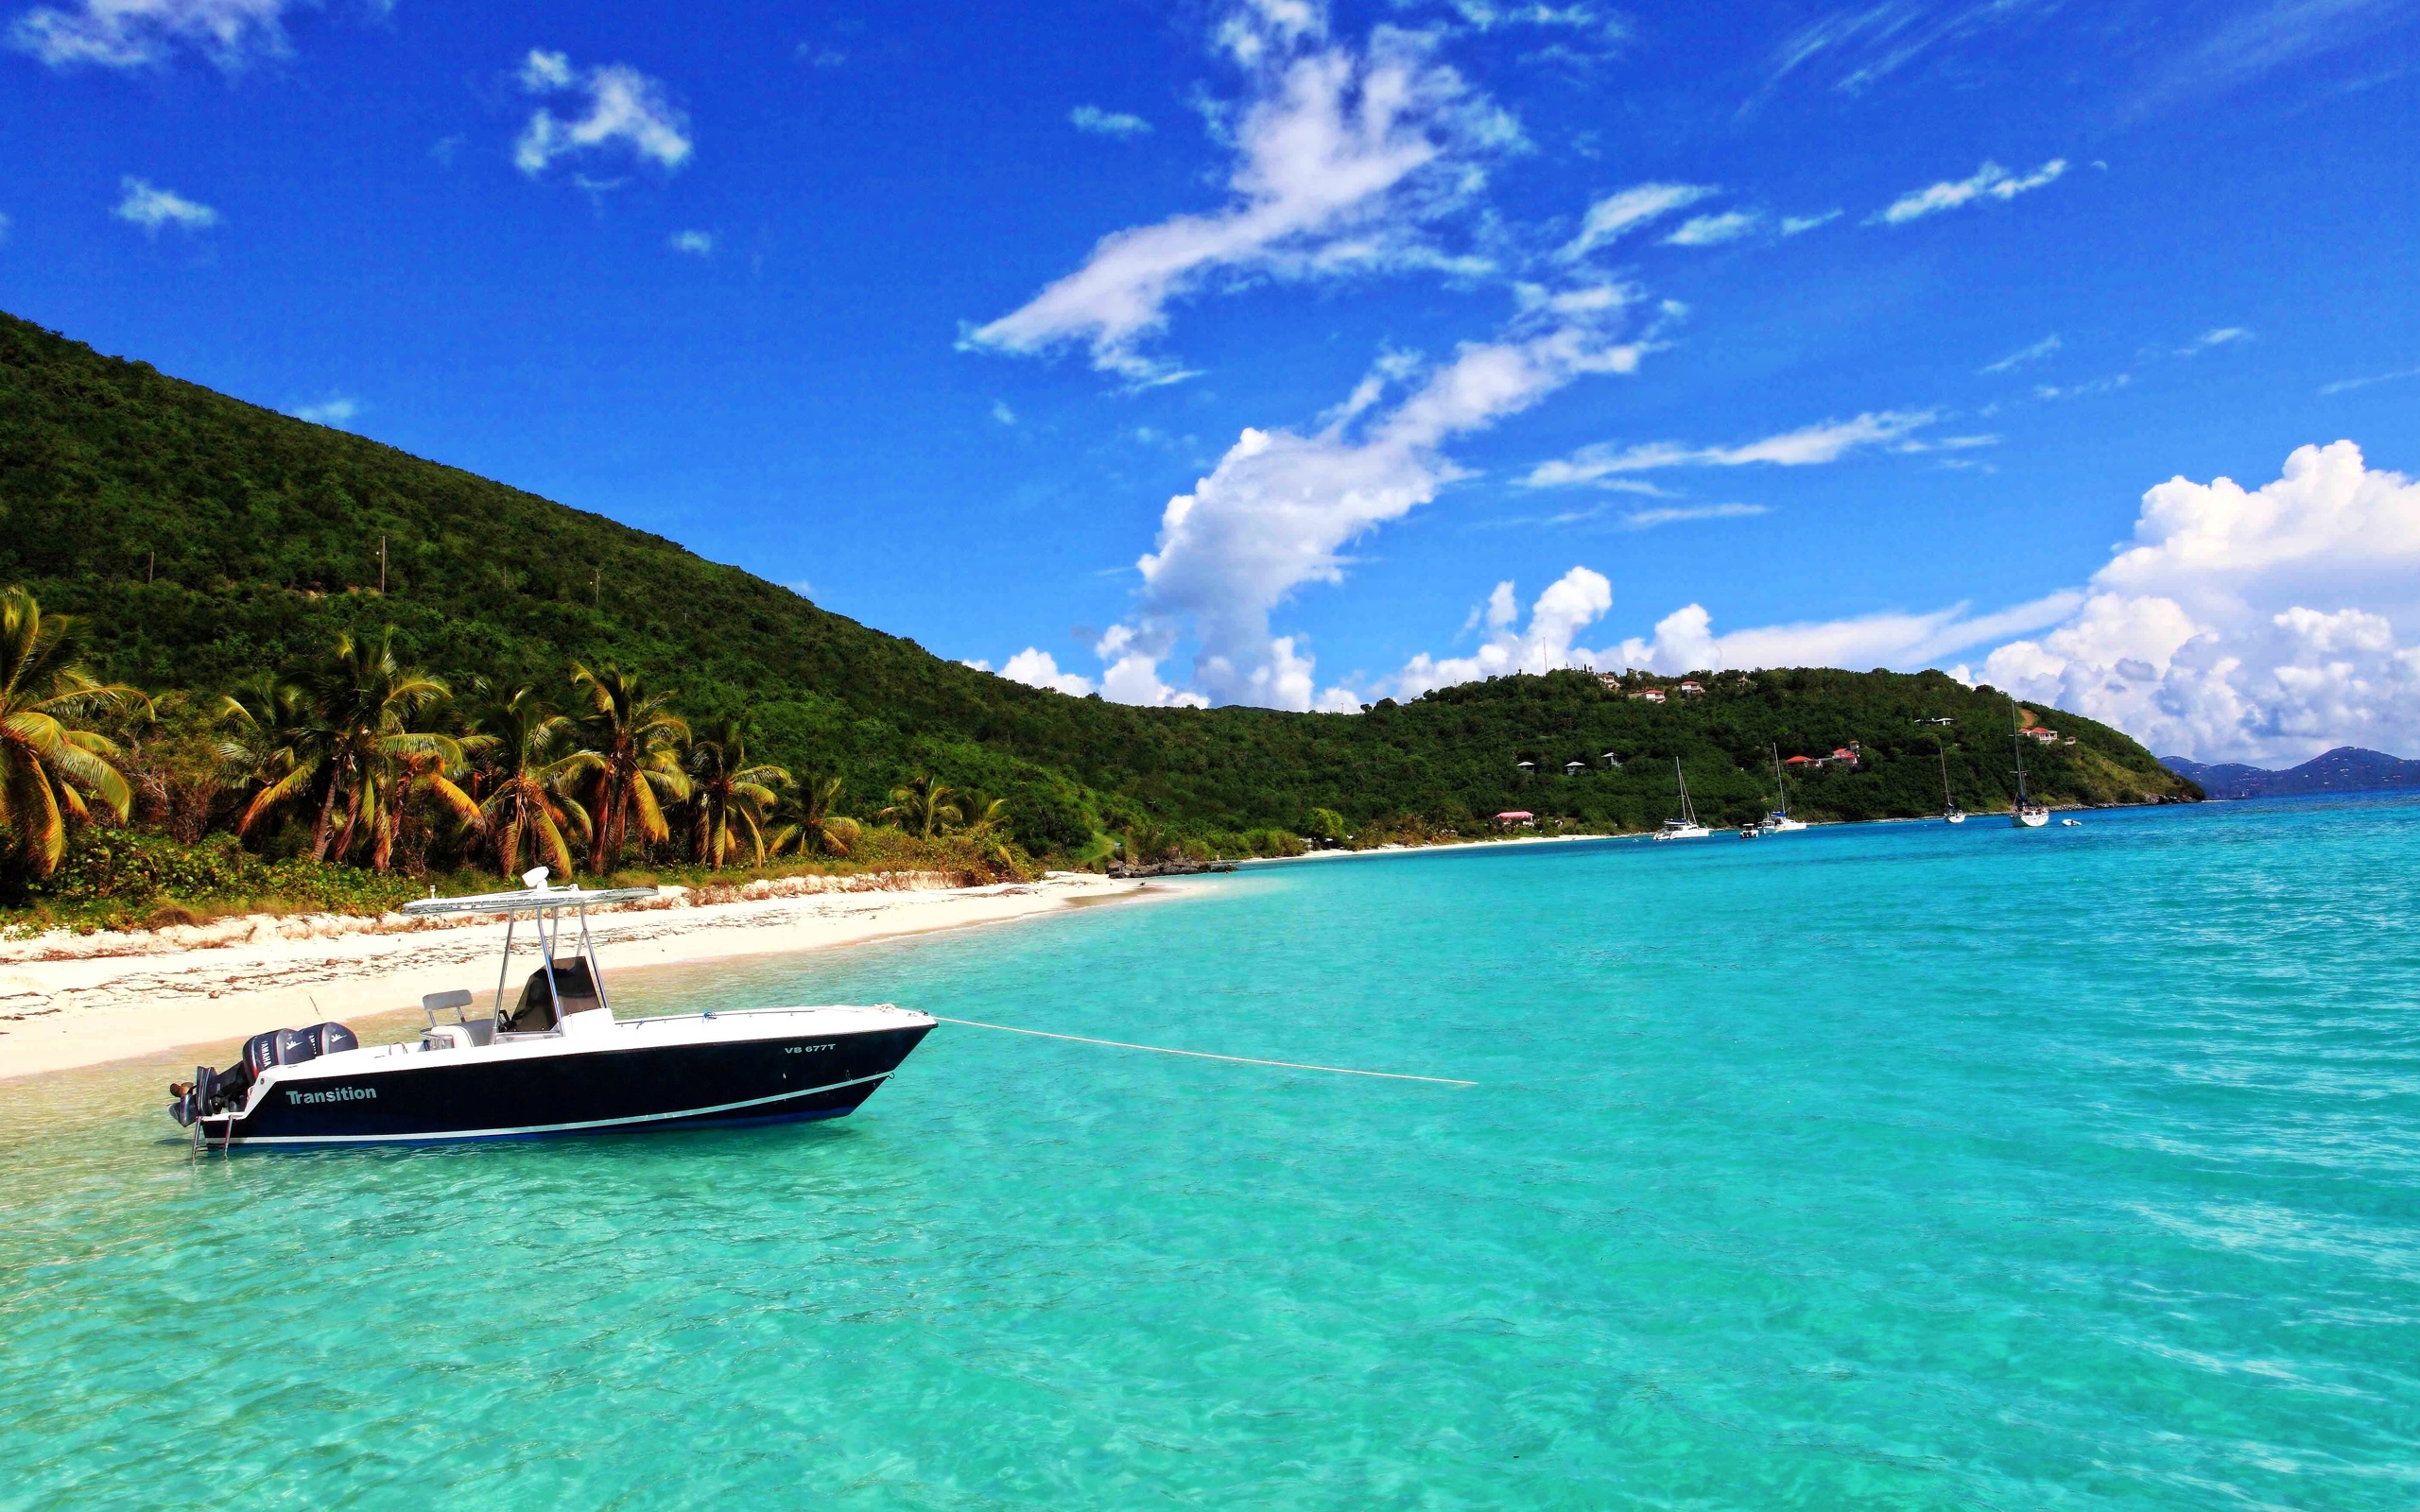 Boat on the Caribbean Island | Photo and Desktop Wallpaper